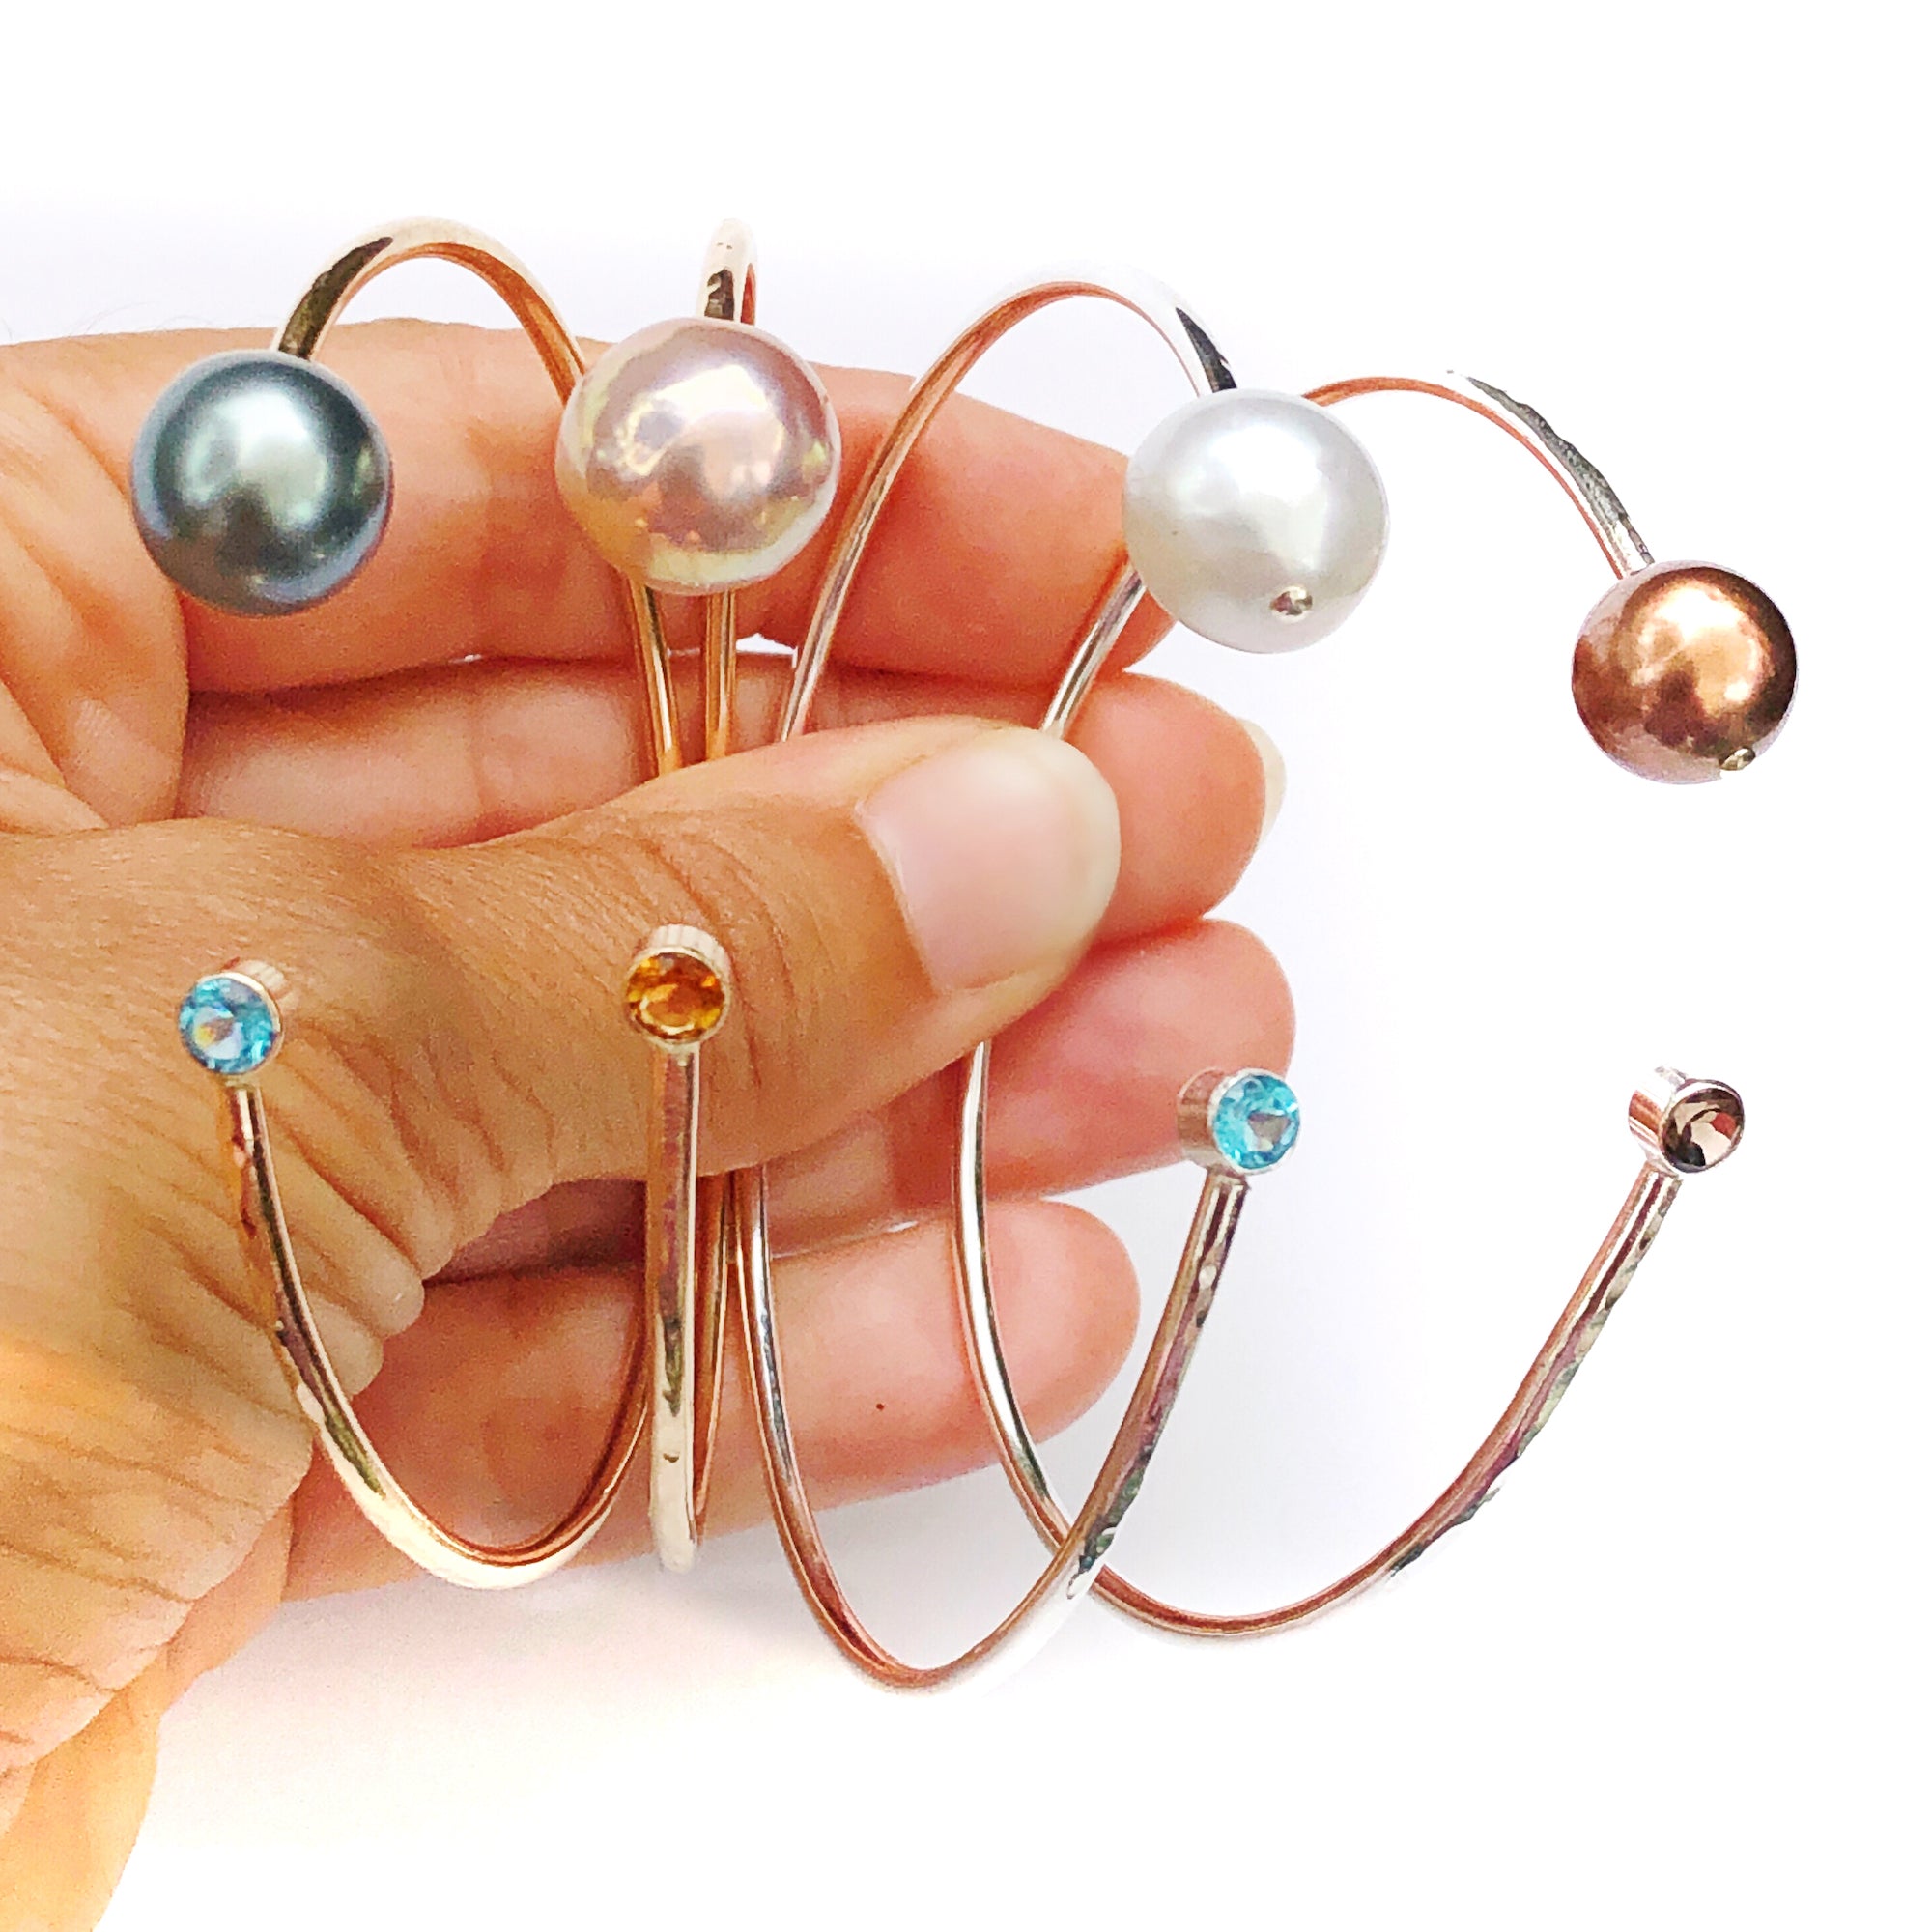 Cultured Pearls Cuff Bracelets With Gemstones